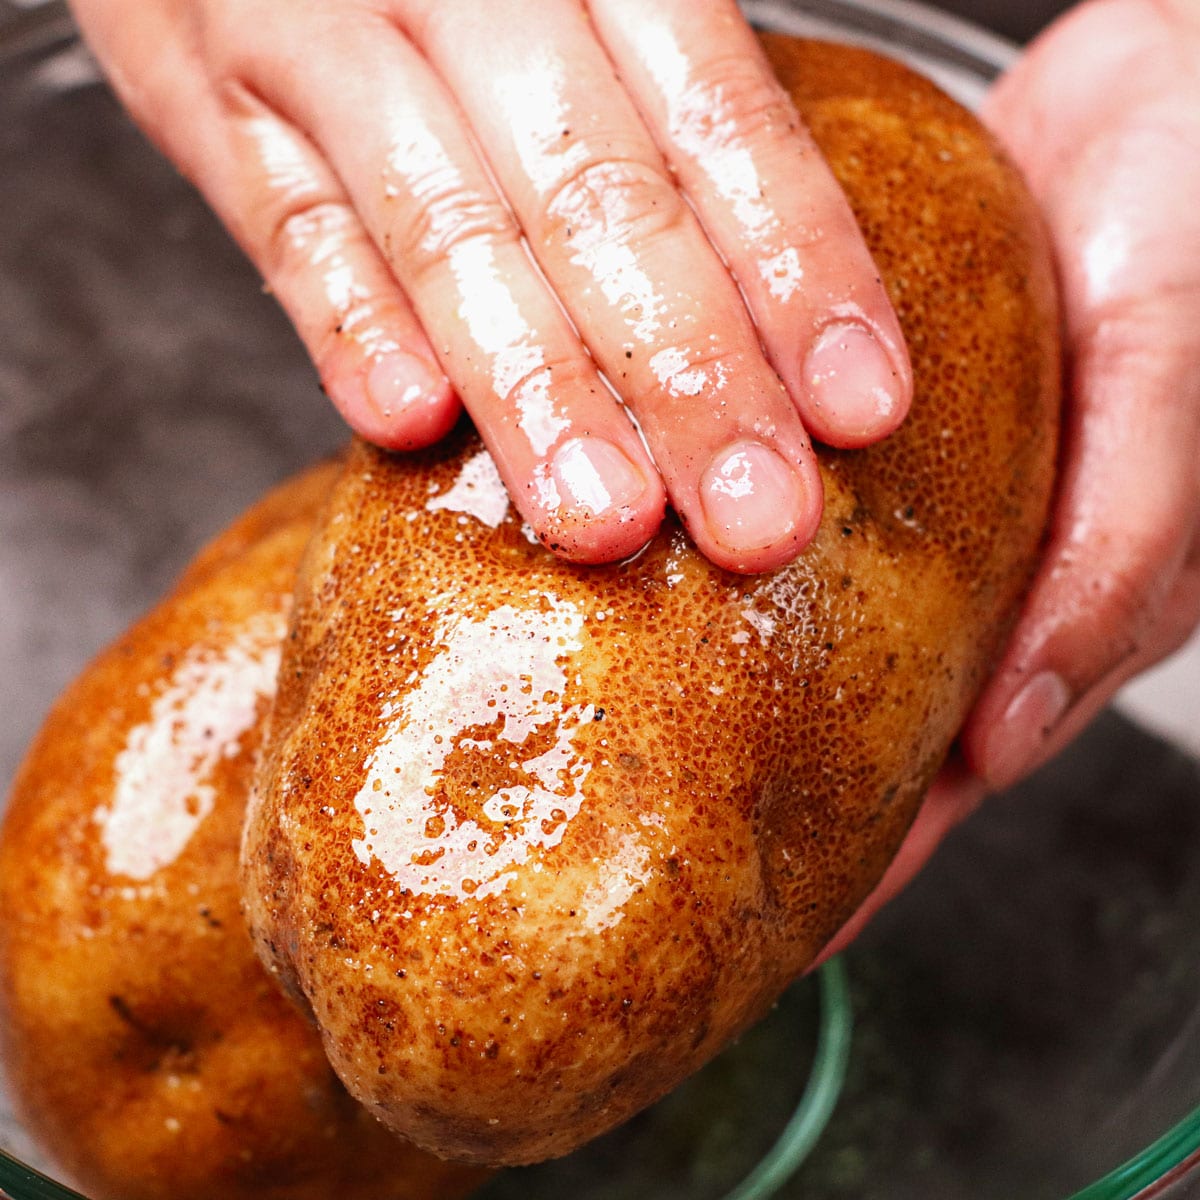 Seasoning whole potato with olive oil, salt and pepper